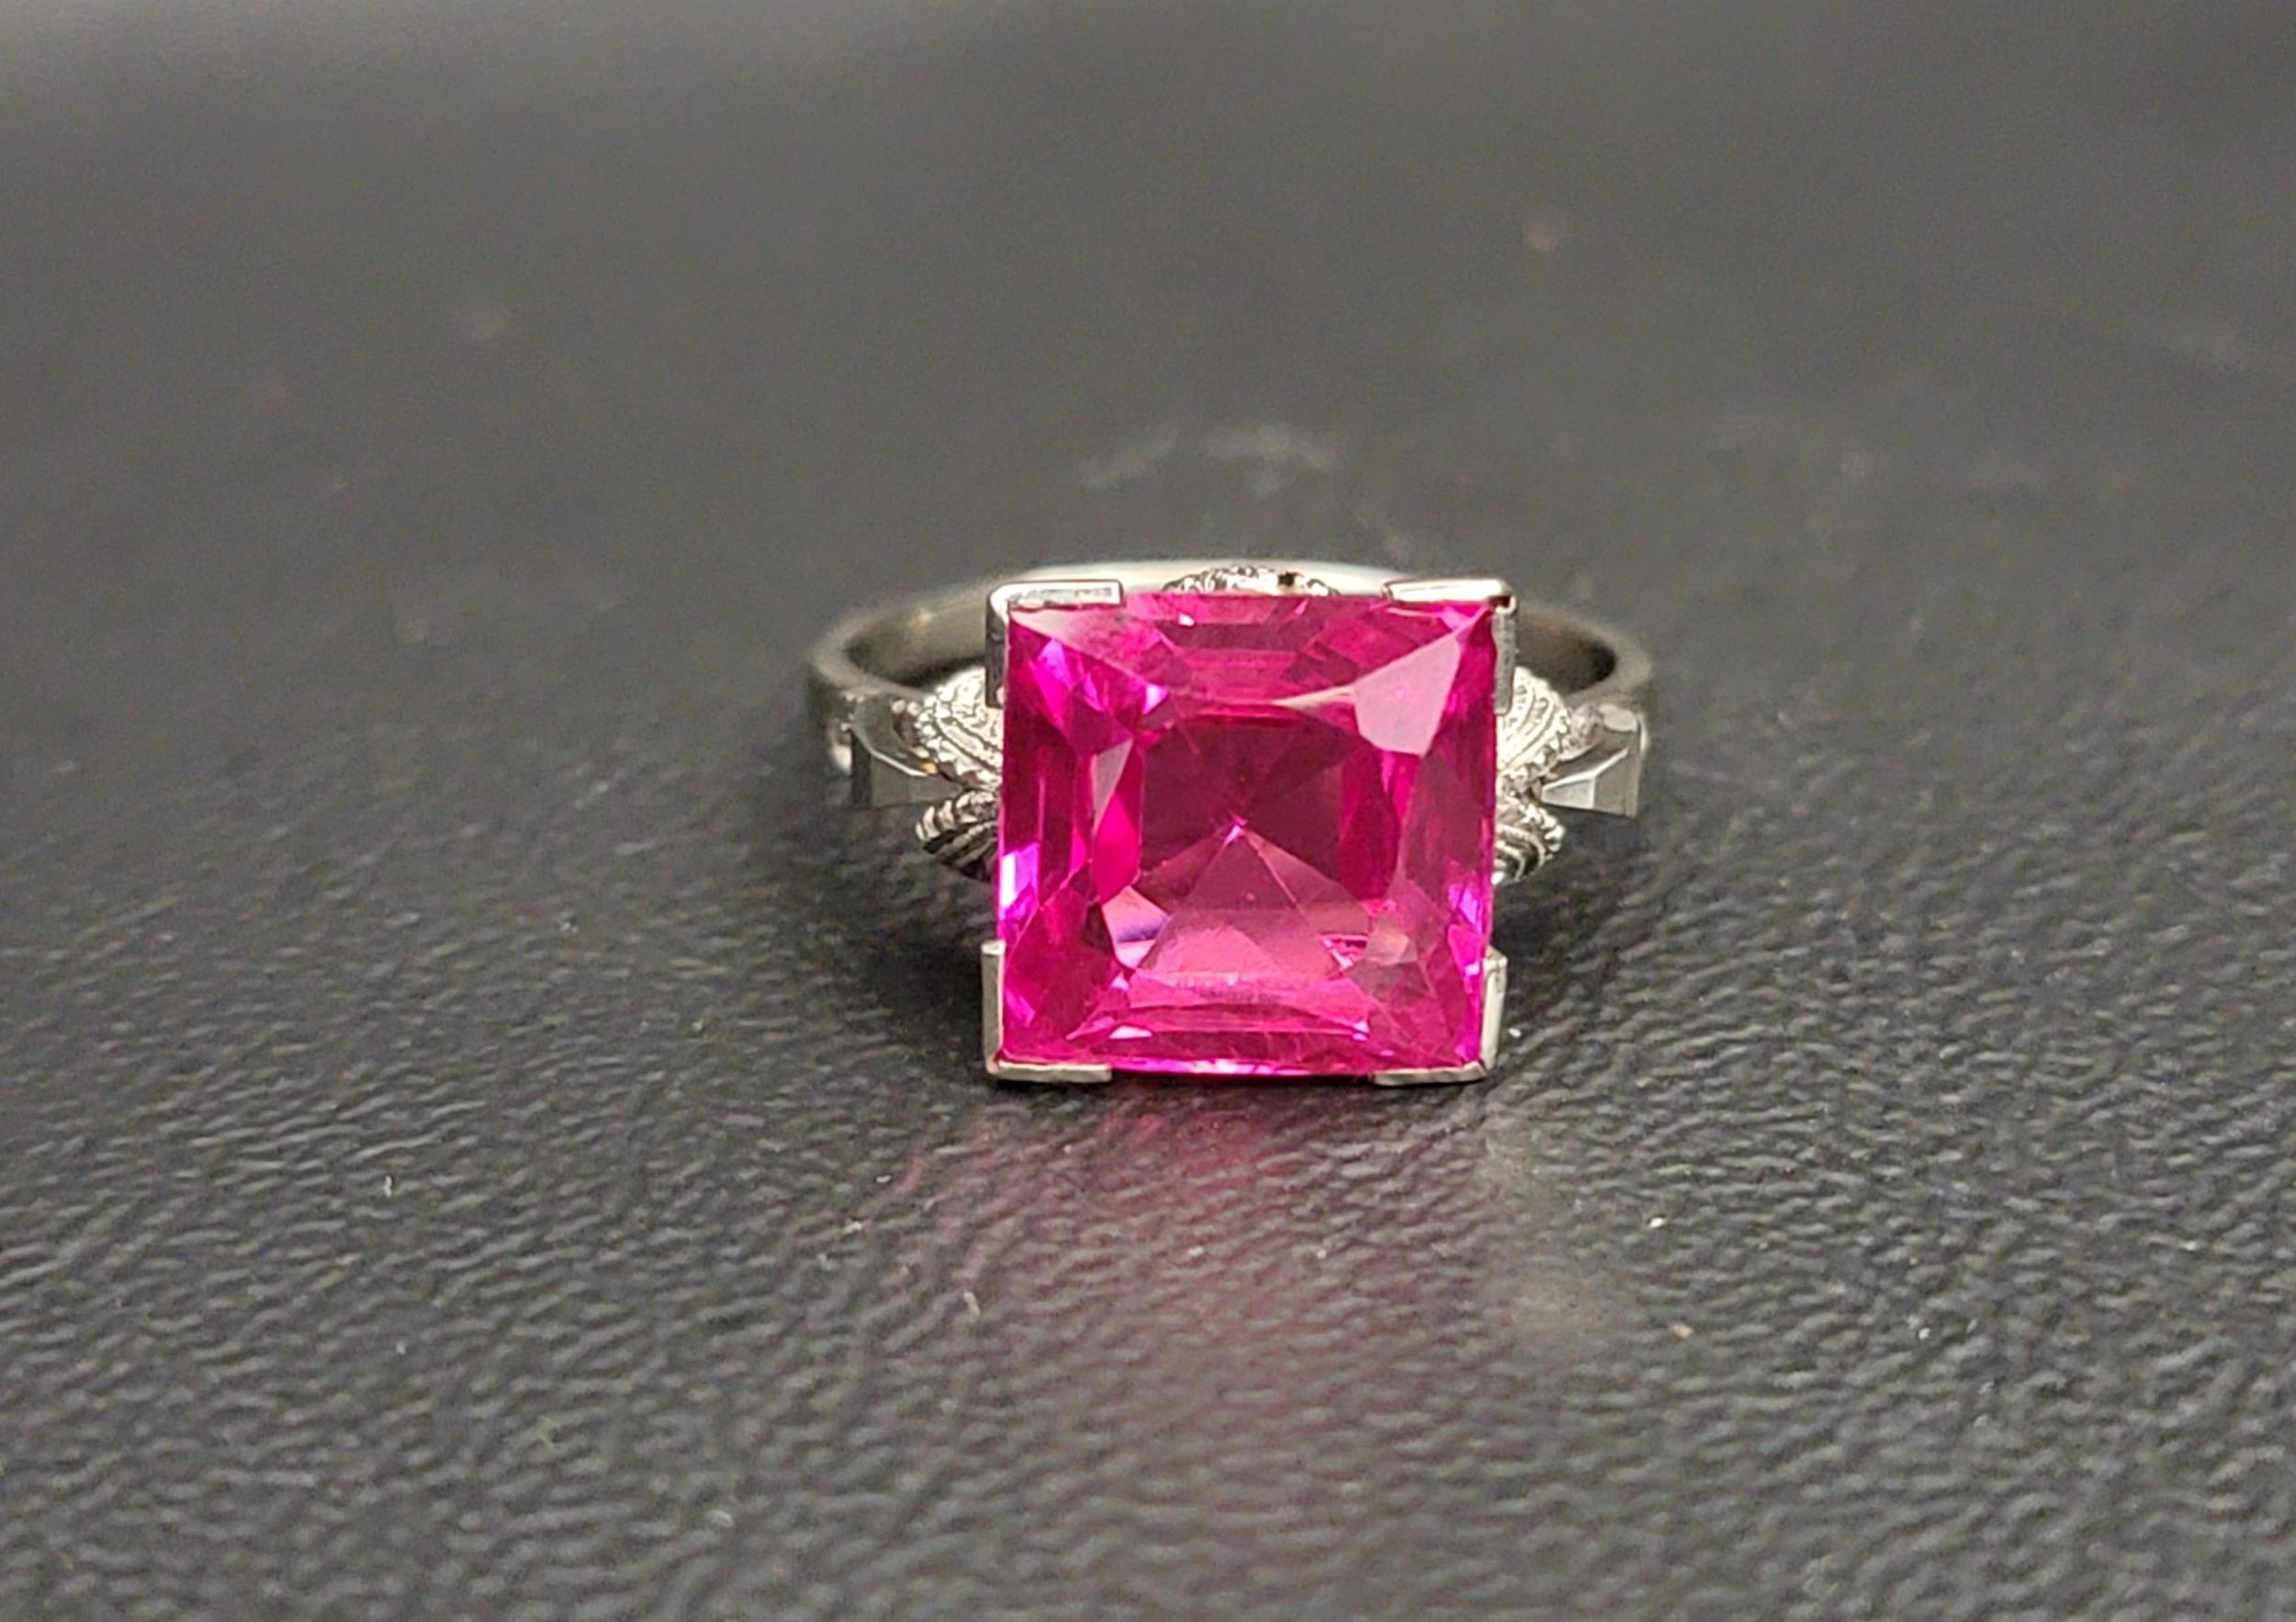 RED GEM SET SINGLE STONE COCKTAIL RING the large gemstone probably ruby and measuring